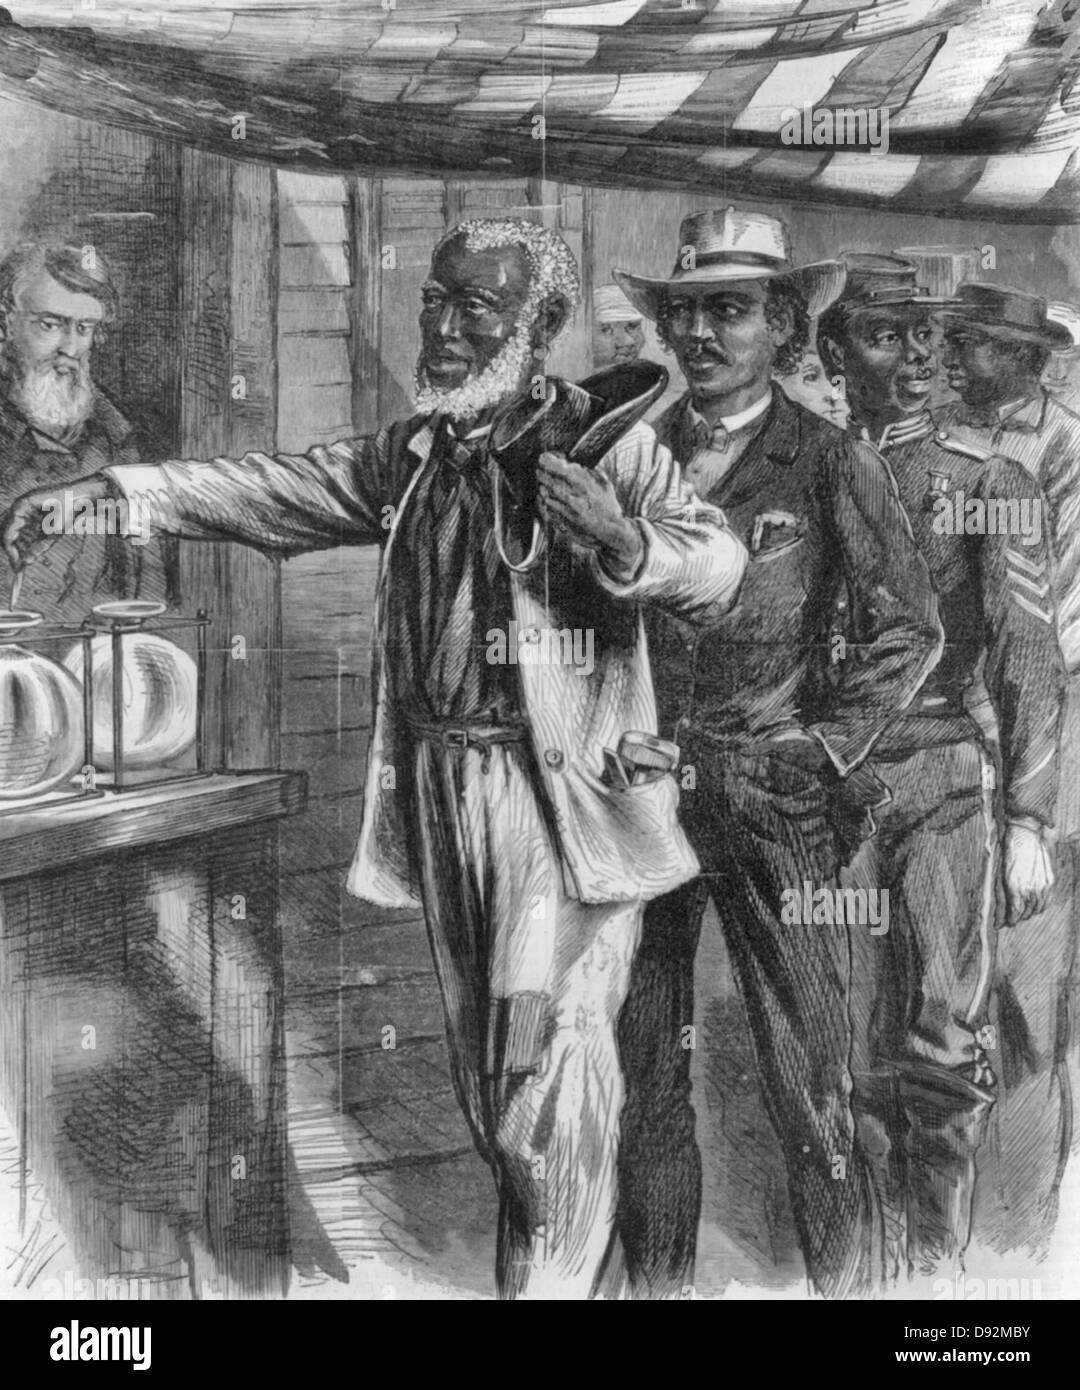 The First Vote - A queue of African American men, the first, dressed as a laborer, casting his vote, the second is dressed as a businessman, the third is wearing a Union army uniform, and the fourth appears to be dressed as a farmer, post Civil War America, circa 1867 Stock Photo